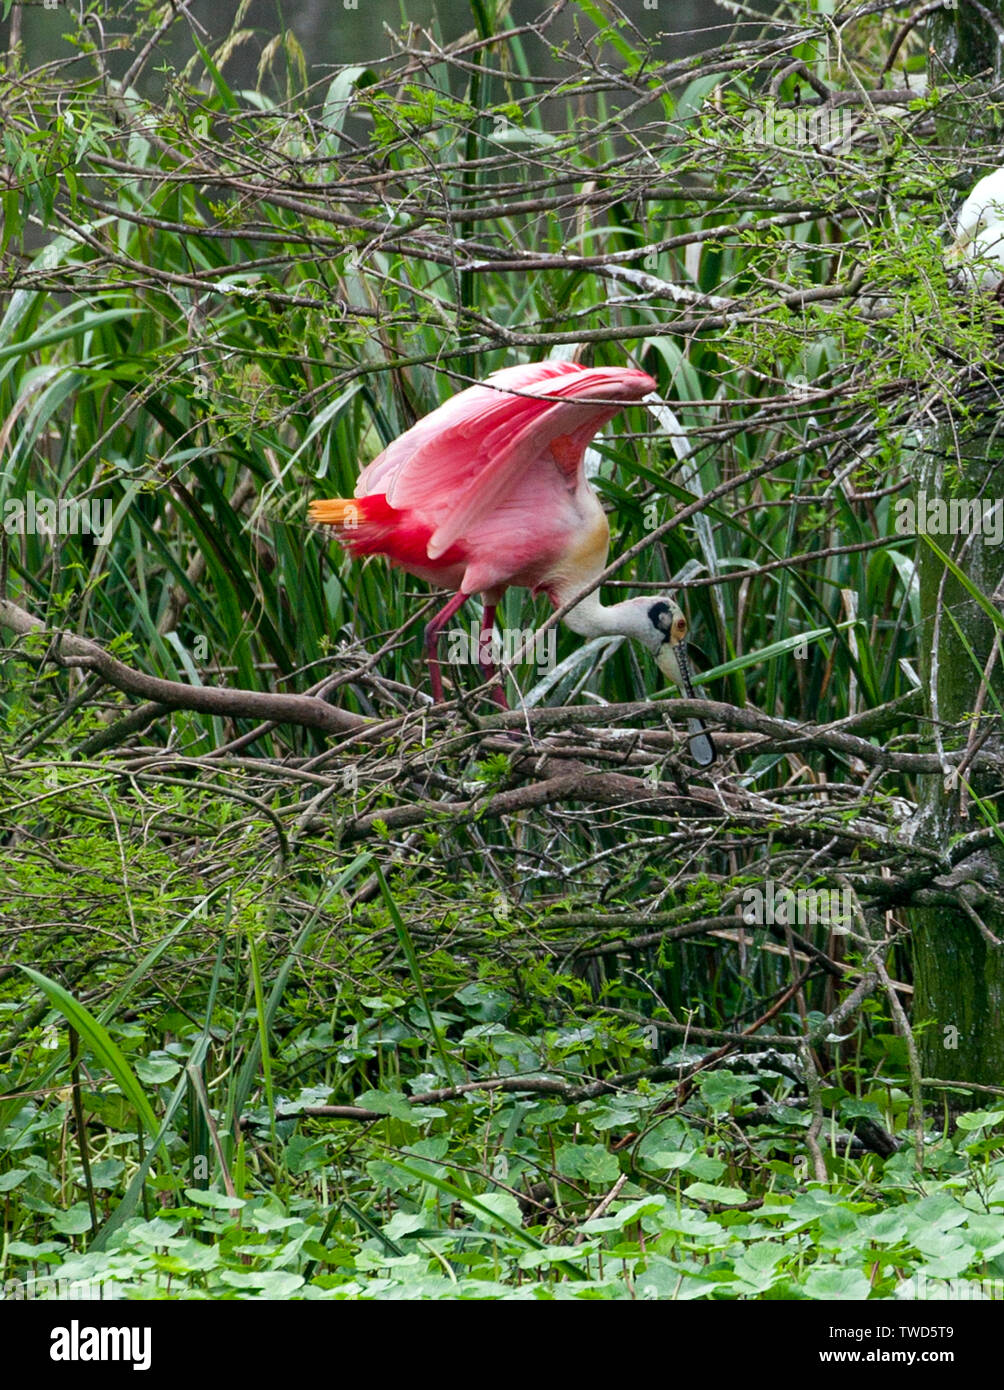 Landing shows off the resplendent coloration of a Roseate Spoonbill, Rookery, Smith Oaks Bird Sanctuary, High Island, Texas. Note the pink orange tail Stock Photo